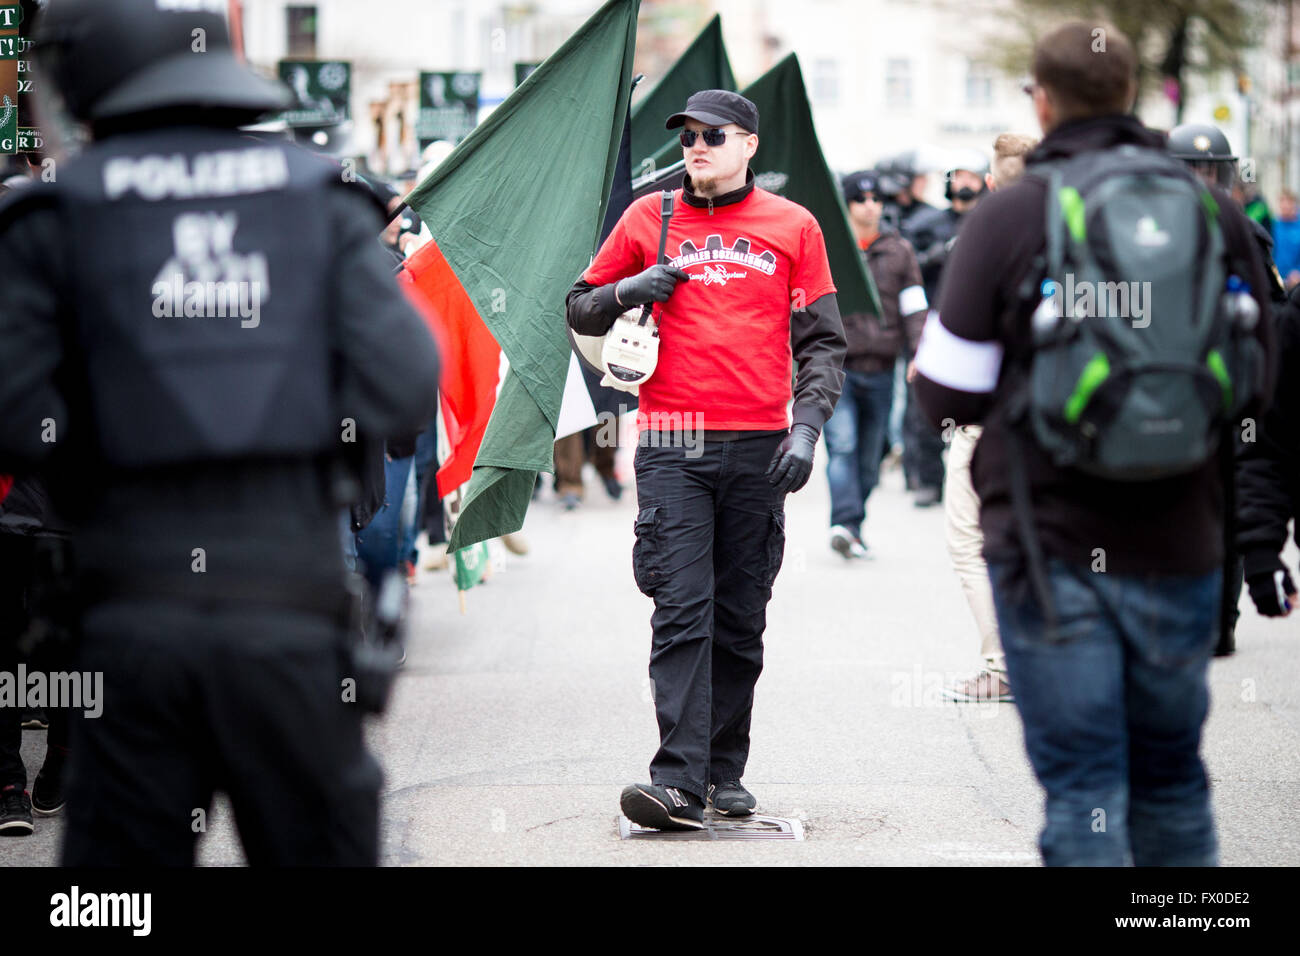 Neonazi party III. Weg rallied through Ingolstadt today. Approximately 70 neonazis demonstrated through the Bavarian town. Counter protestors blocked the route twice. 9th Apr, 2016. © 24mmjournalism/ZUMA Wire/Alamy Live News Stock Photo